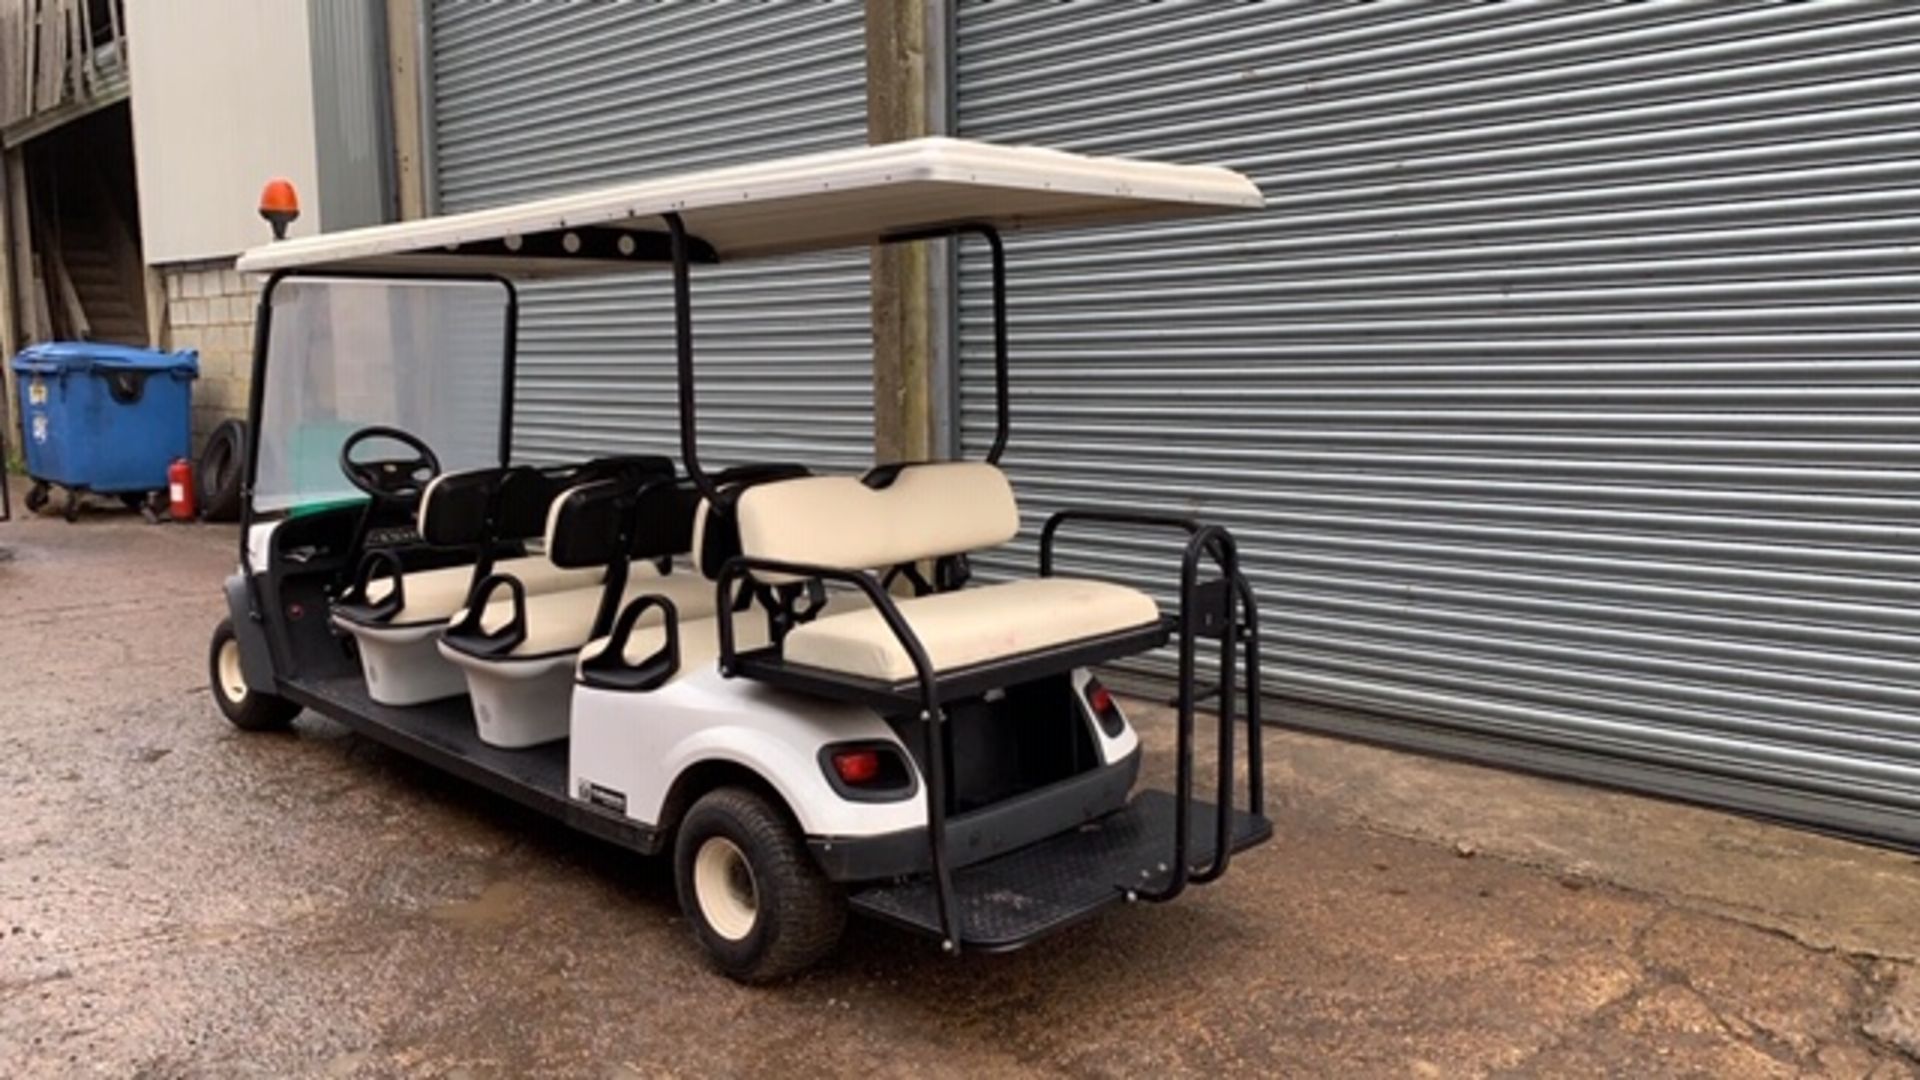 CUSHMAN EZGO SHUTTLE 8 PETROL ENGINED 8 SEATER EVENTS GOLF BUGGY. YEAR 2017 BUILD. DIRECT FROM - Image 3 of 4